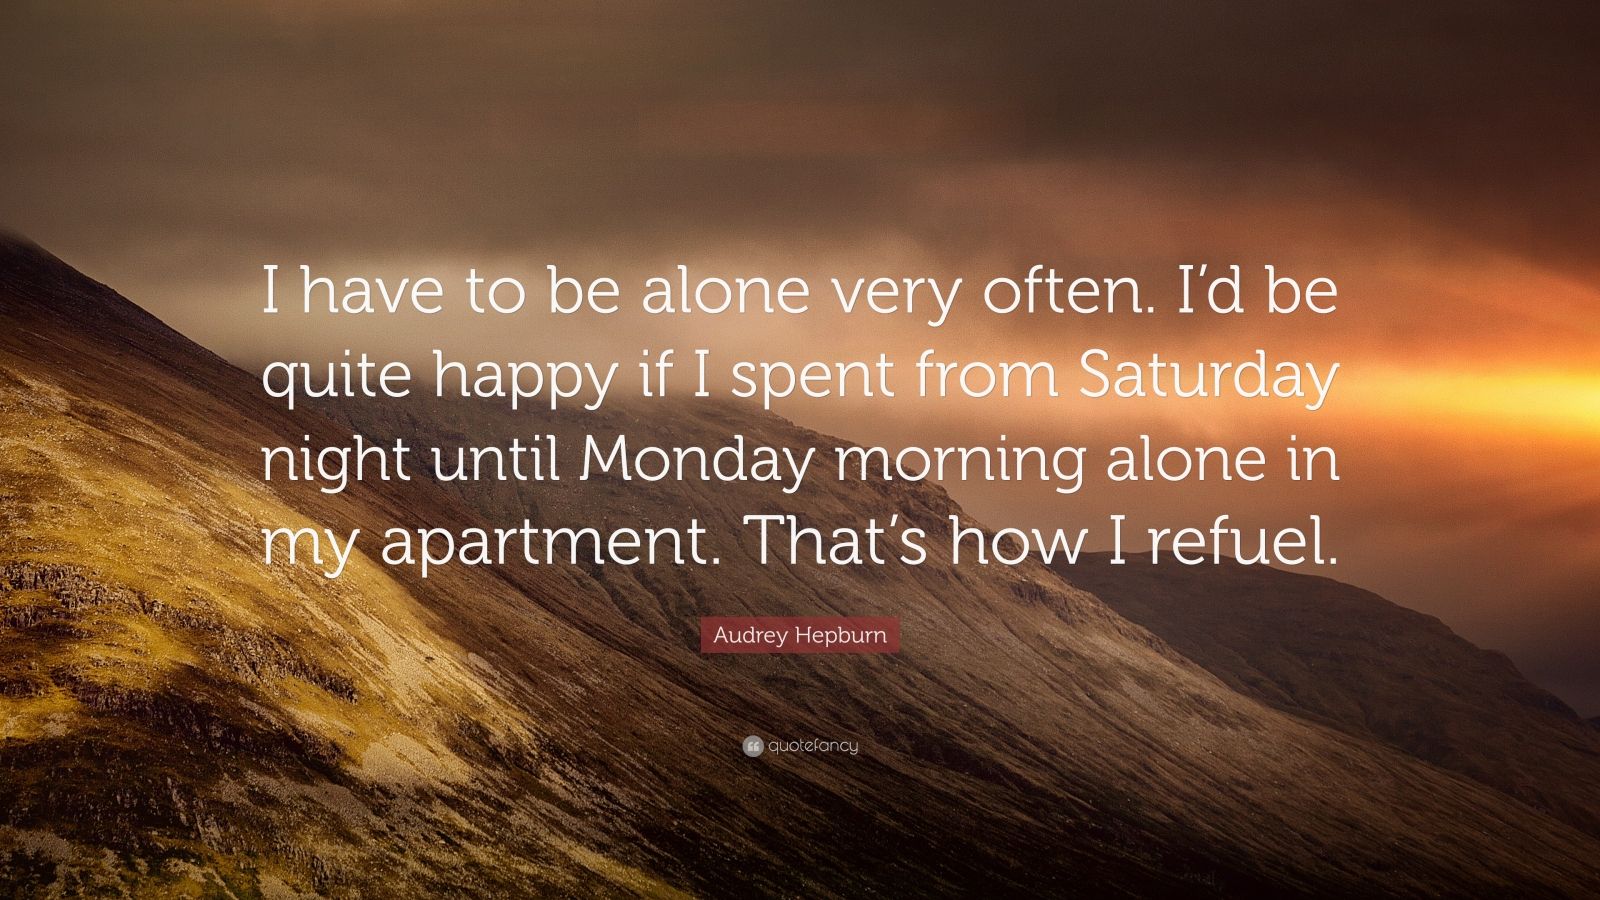 Audrey Hepburn quote: I dont want to be alone, I want to 